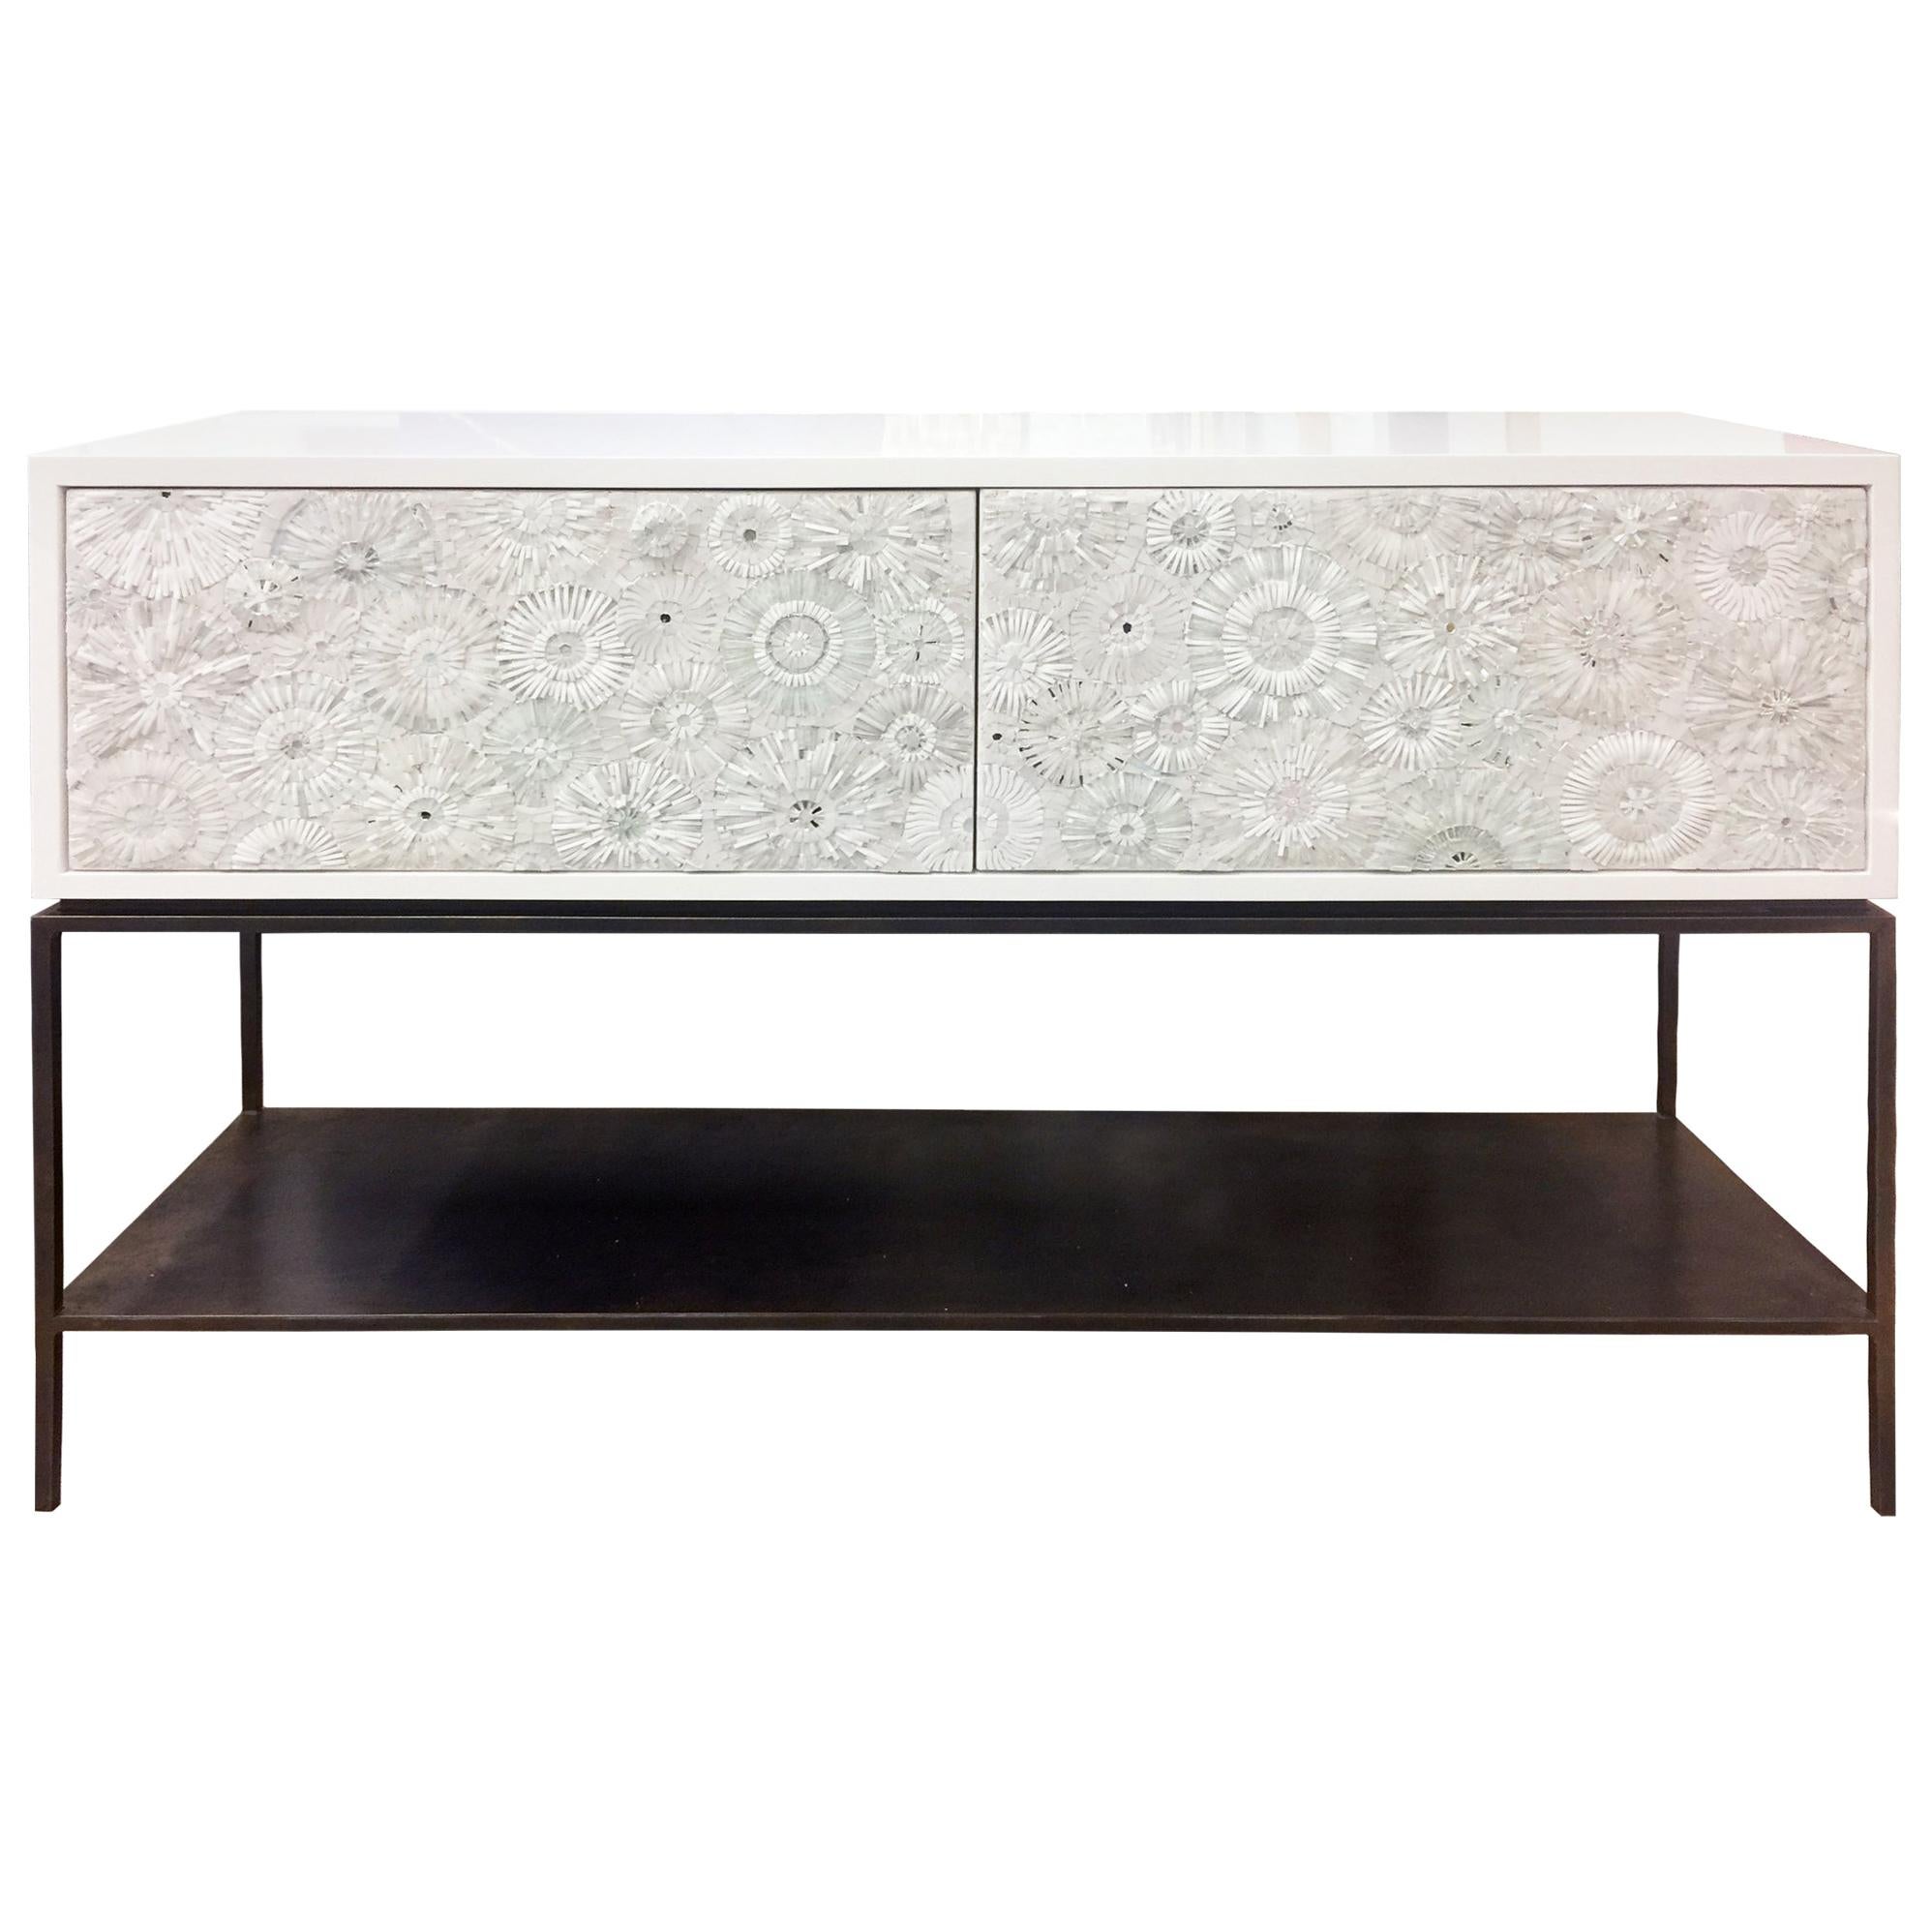 Modern White Blossom Glass Mosaic Buffet with Metal Shelf Base by Ercole Home